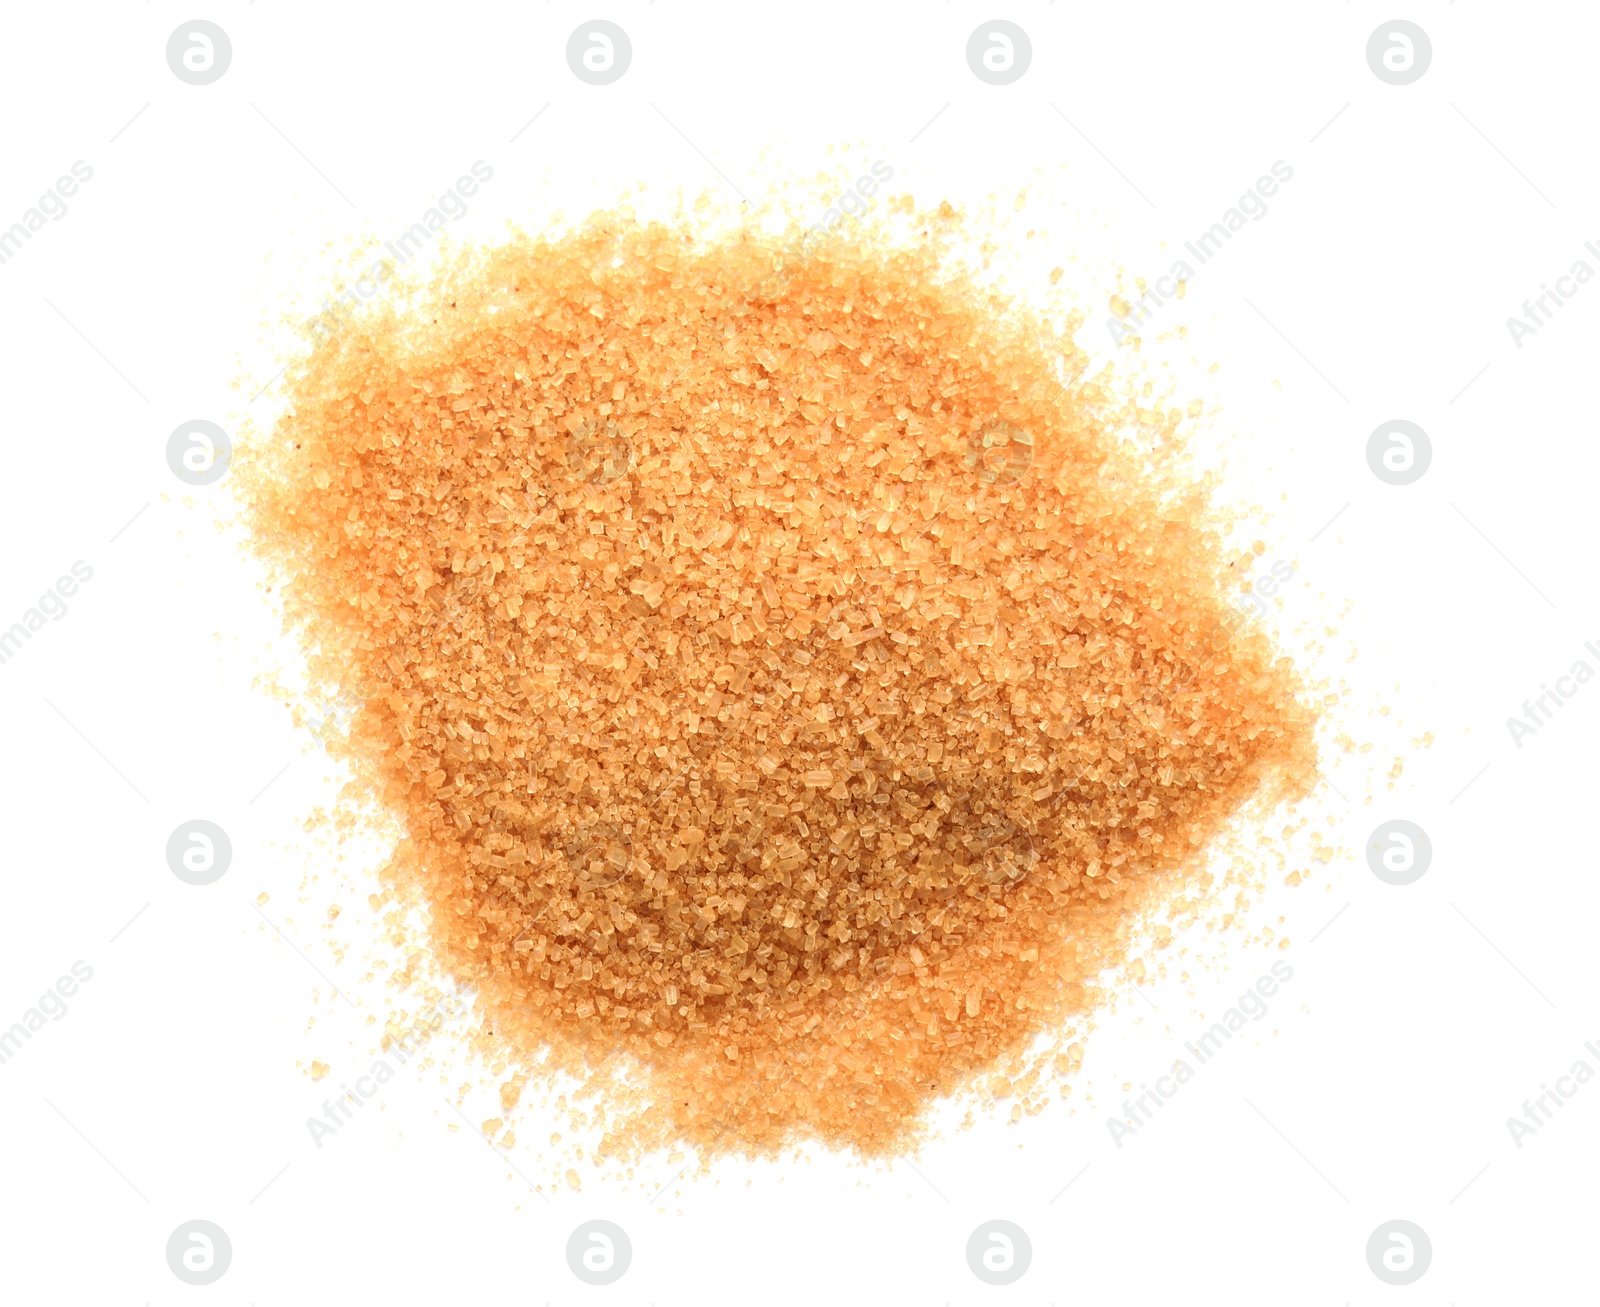 Photo of Pile of brown sugar on white background, top view